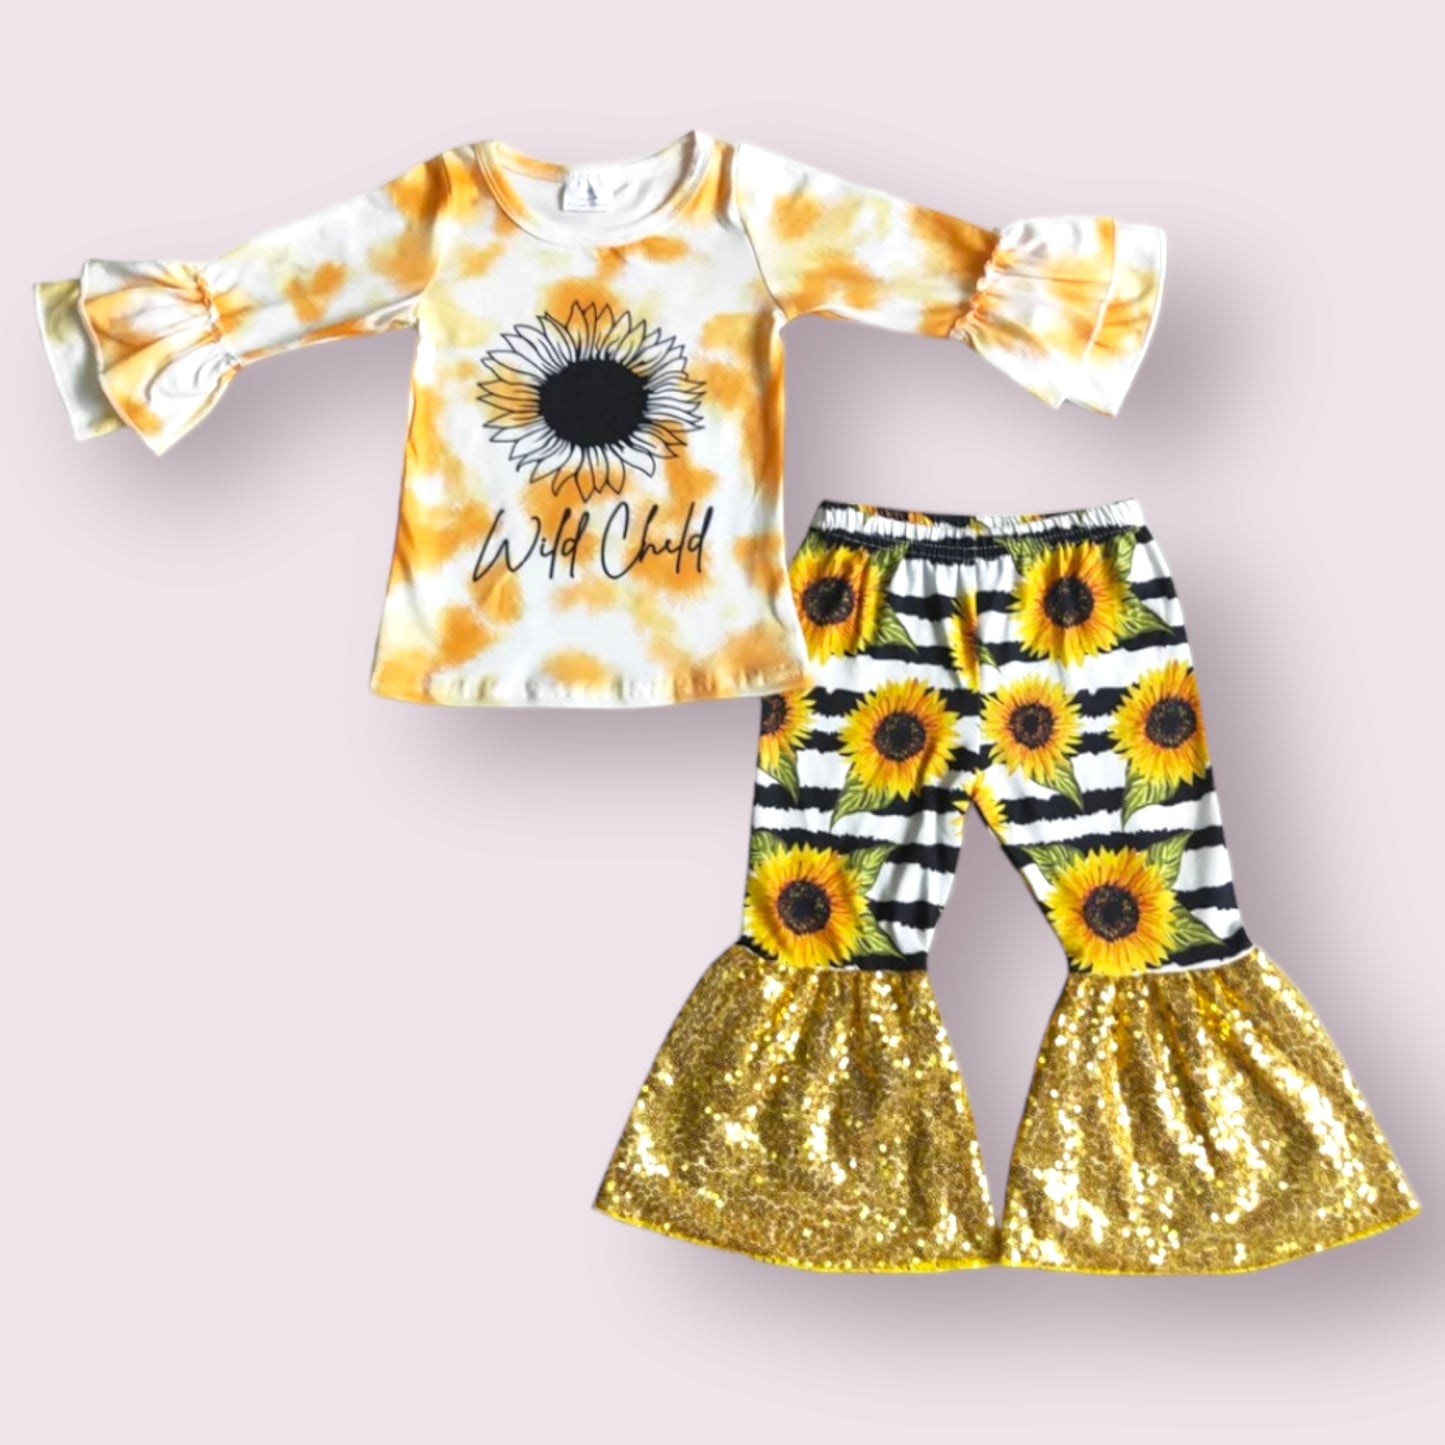 Wild Child Sequin Bell Outfit